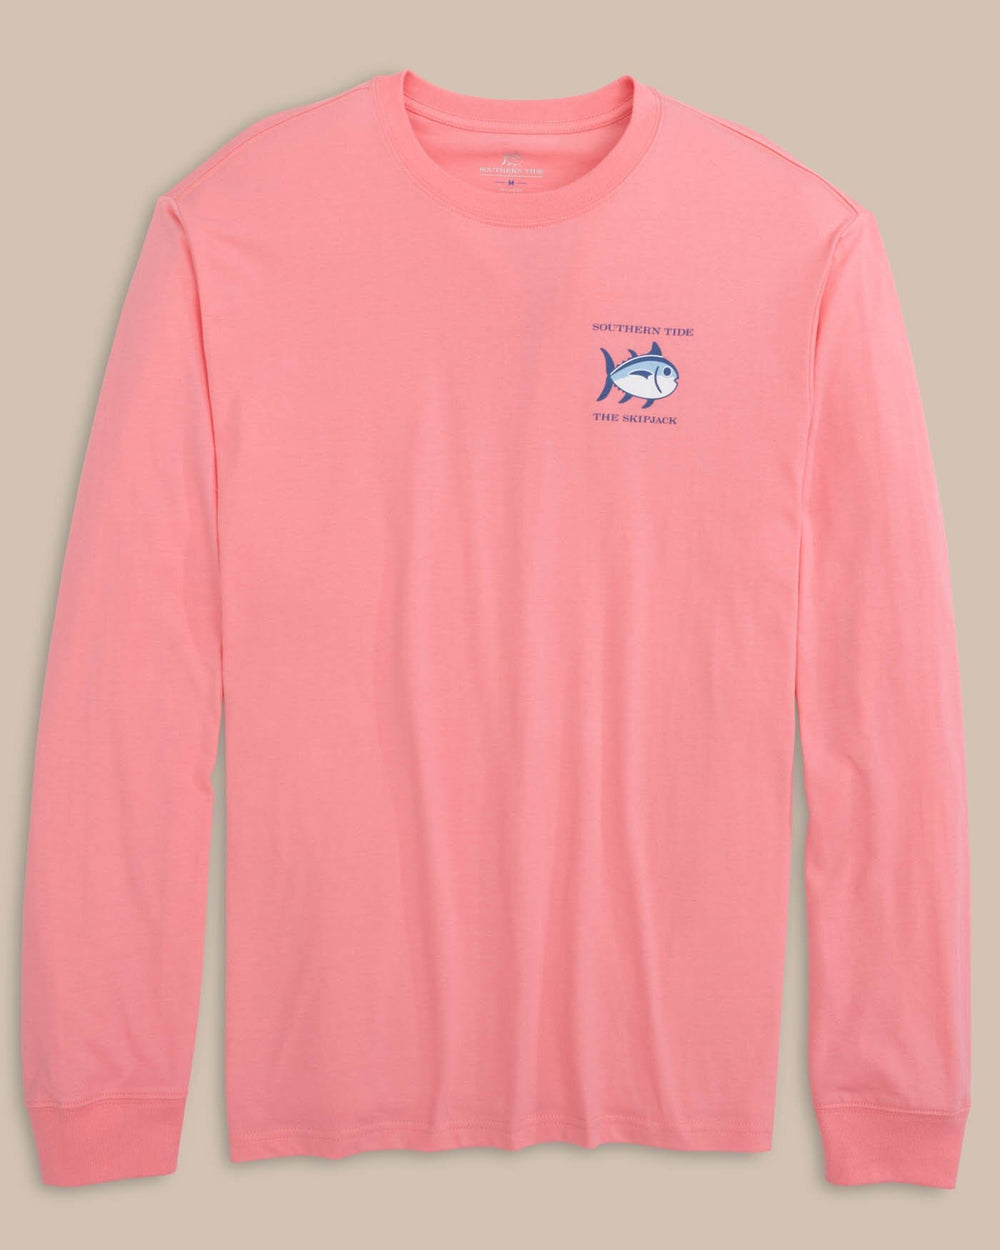 The front view of the Southern Tide Long Sleeve Original Skipjack T-shirt by Southern Tide - Geranium Pink